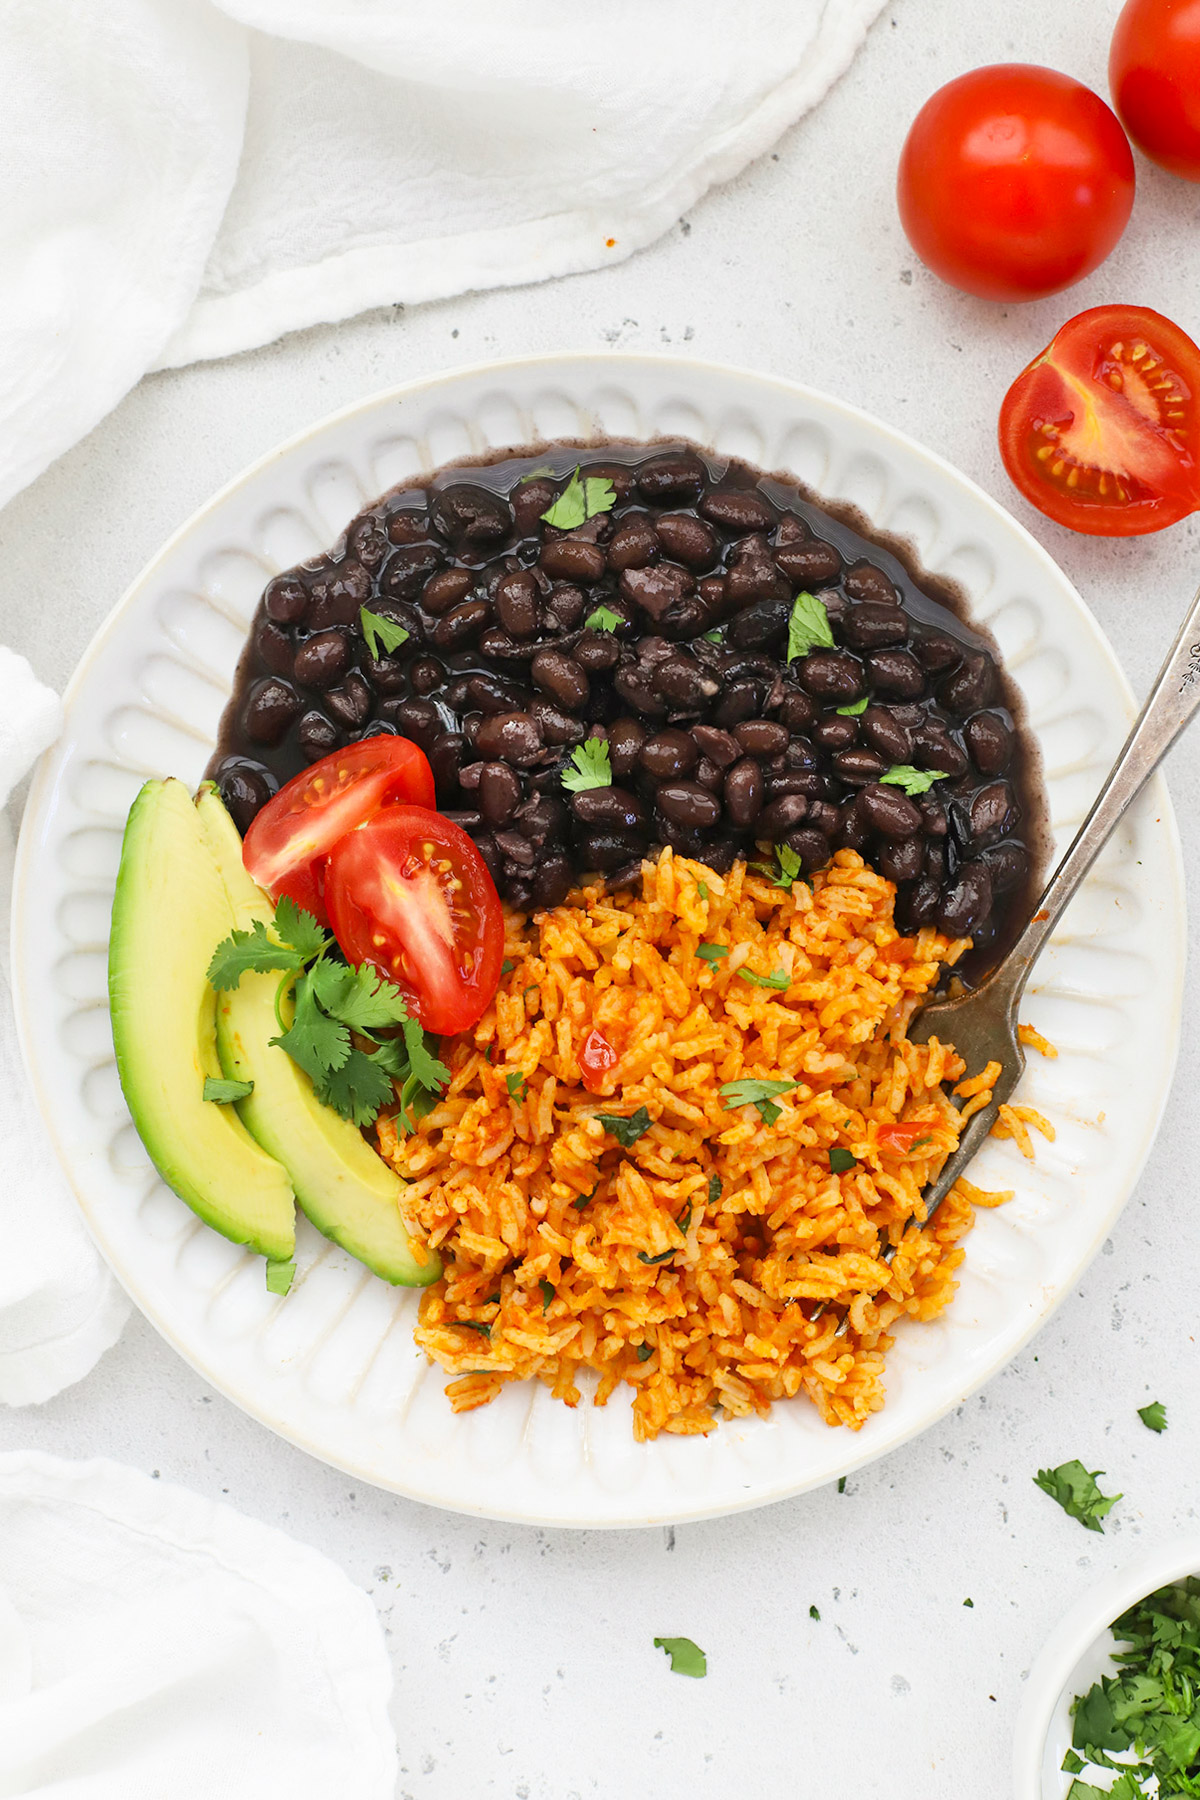 Overhead view of Mexican rice served with black beans